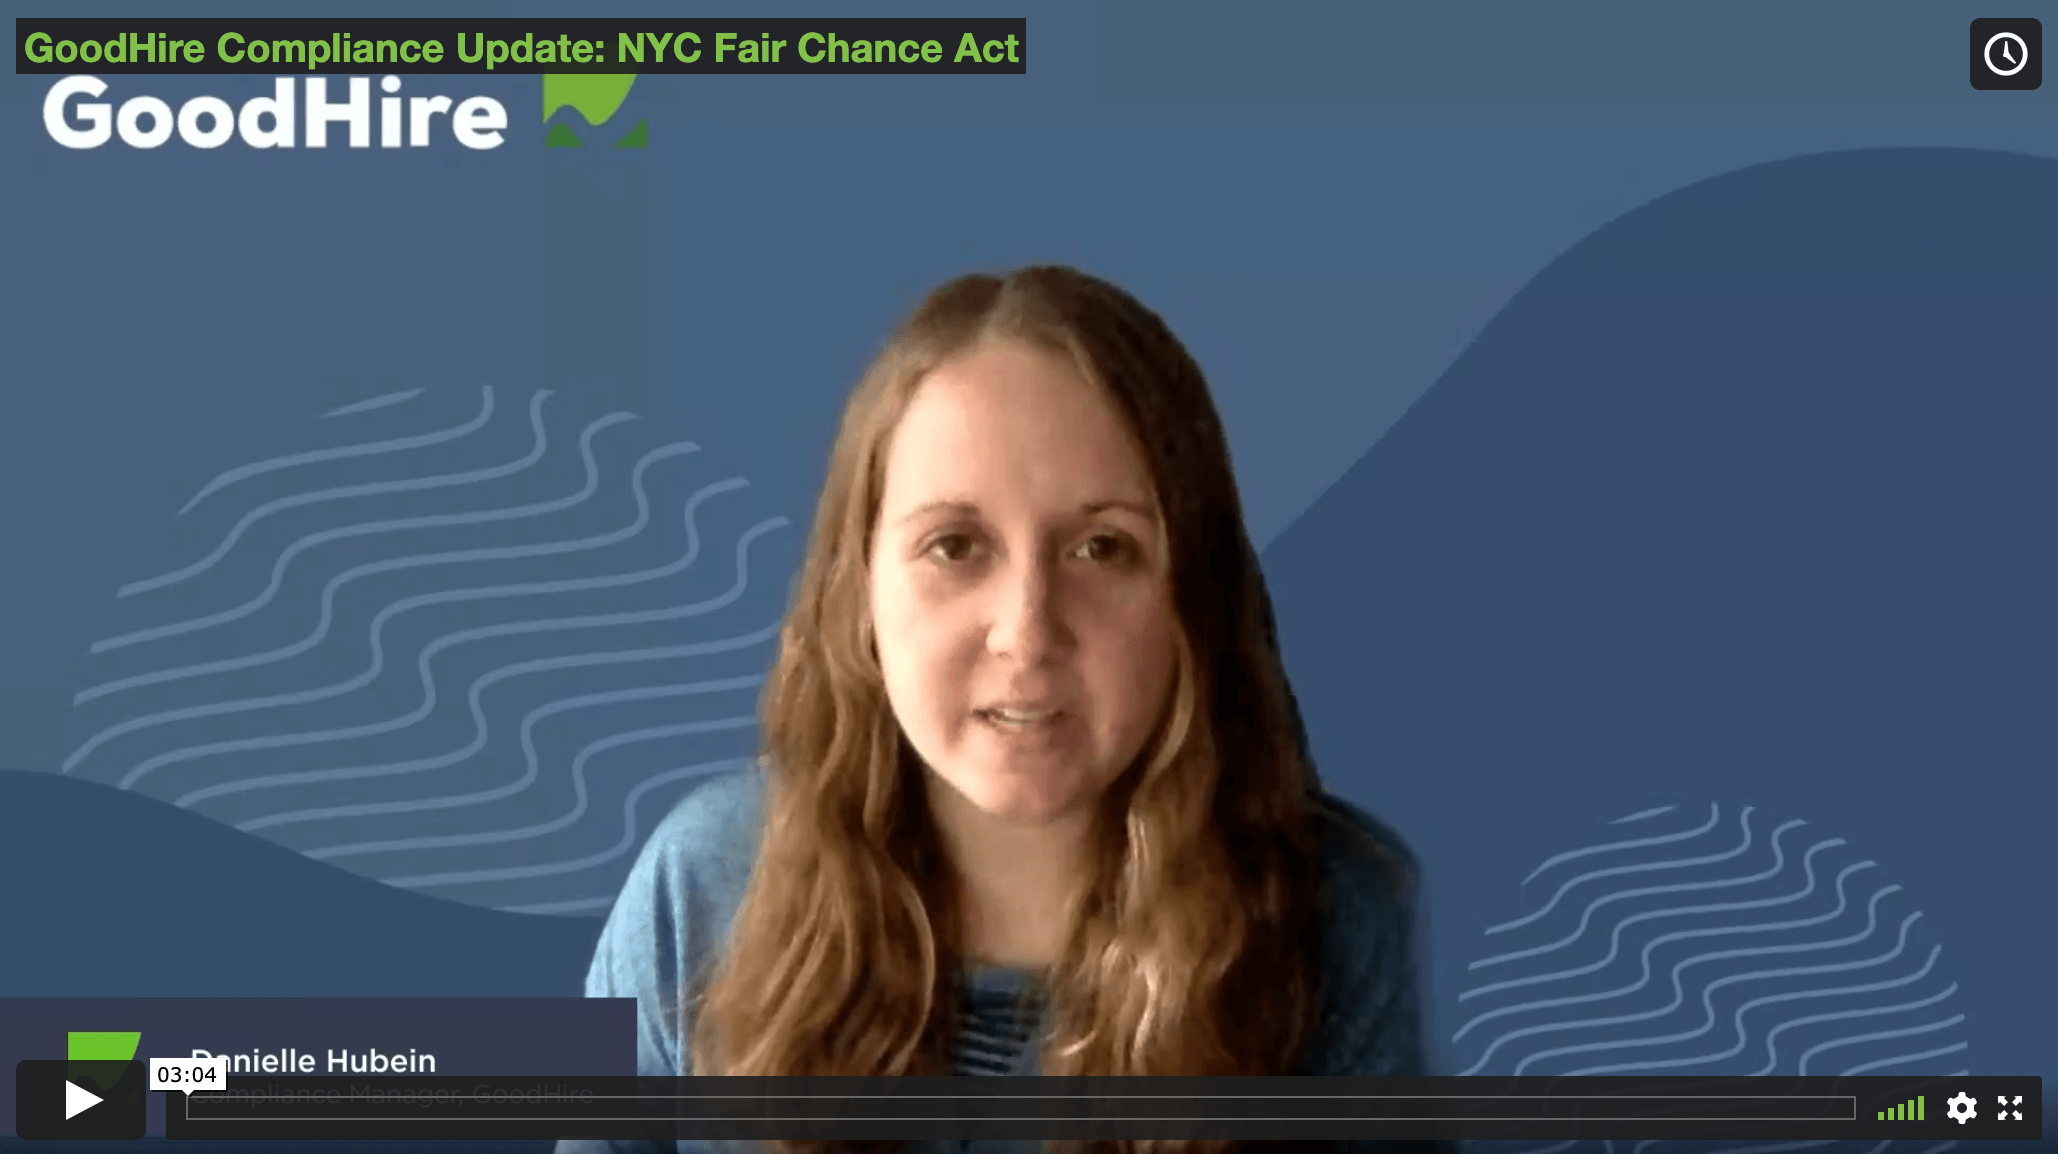 GoodHire's compliance manager explains NYC's fair chance act updates in a video.